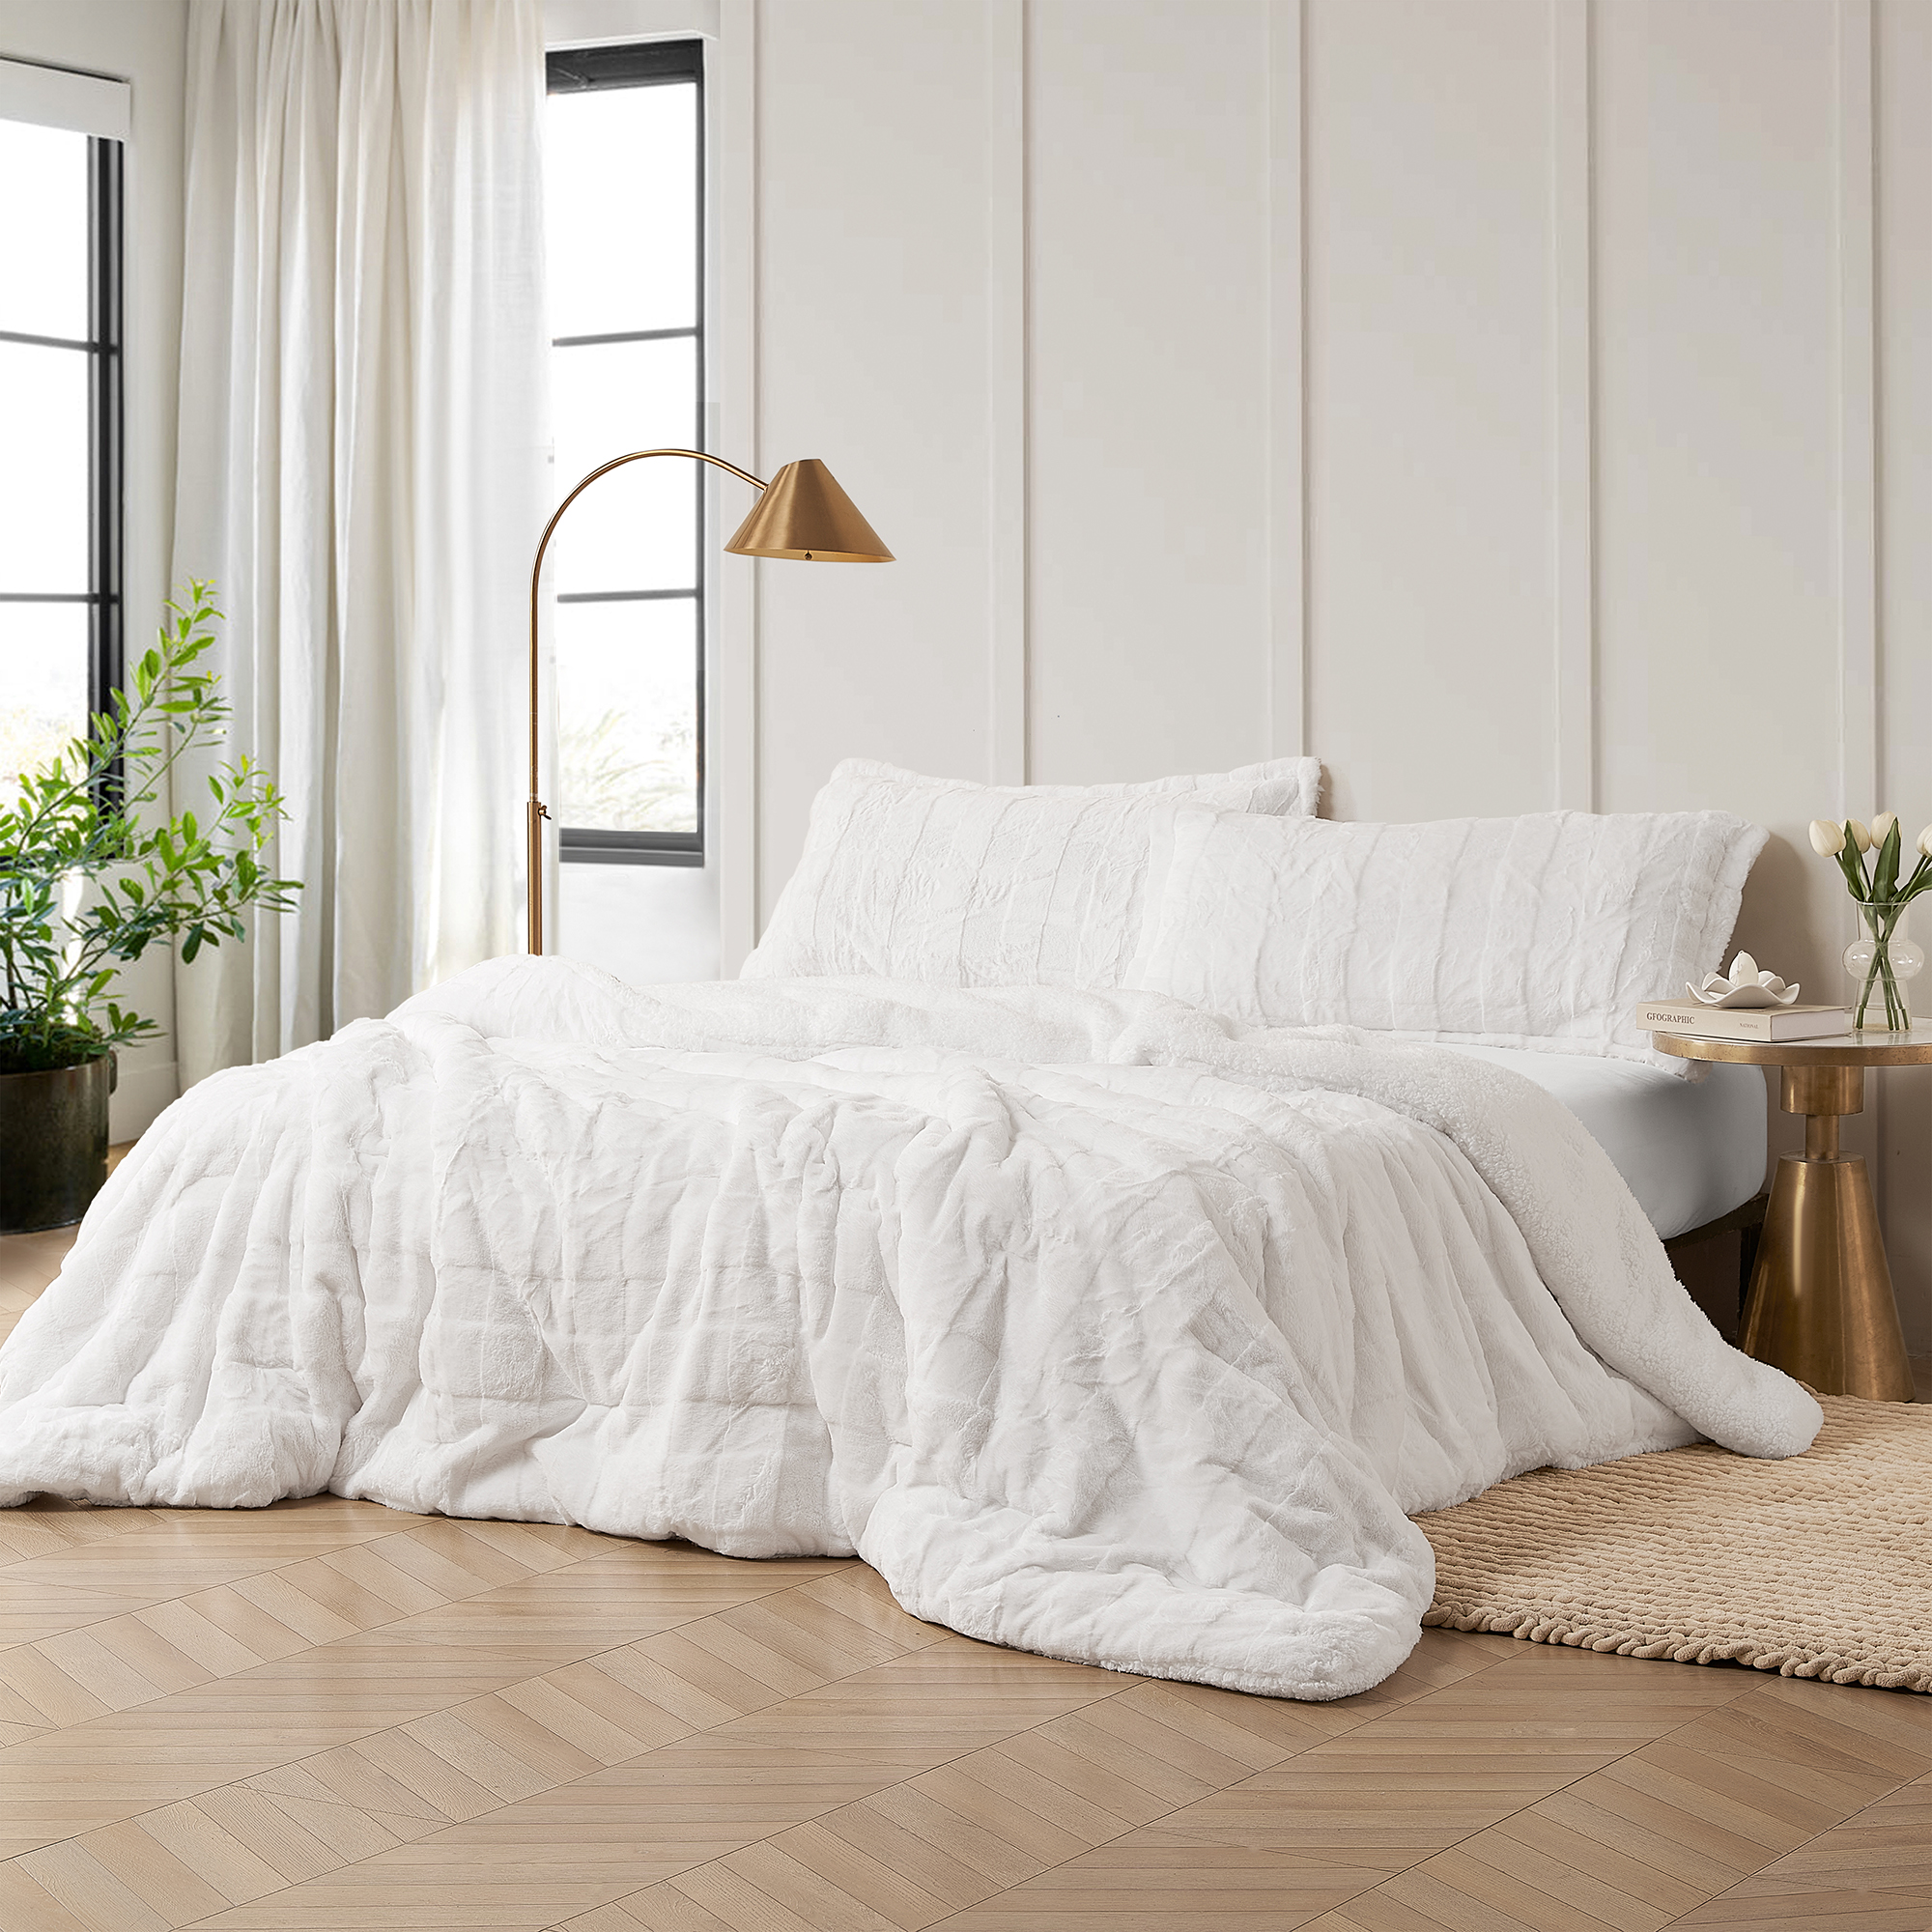 Cut n Sew Chunky Bunny - Coma Inducer Oversized Comforter - White